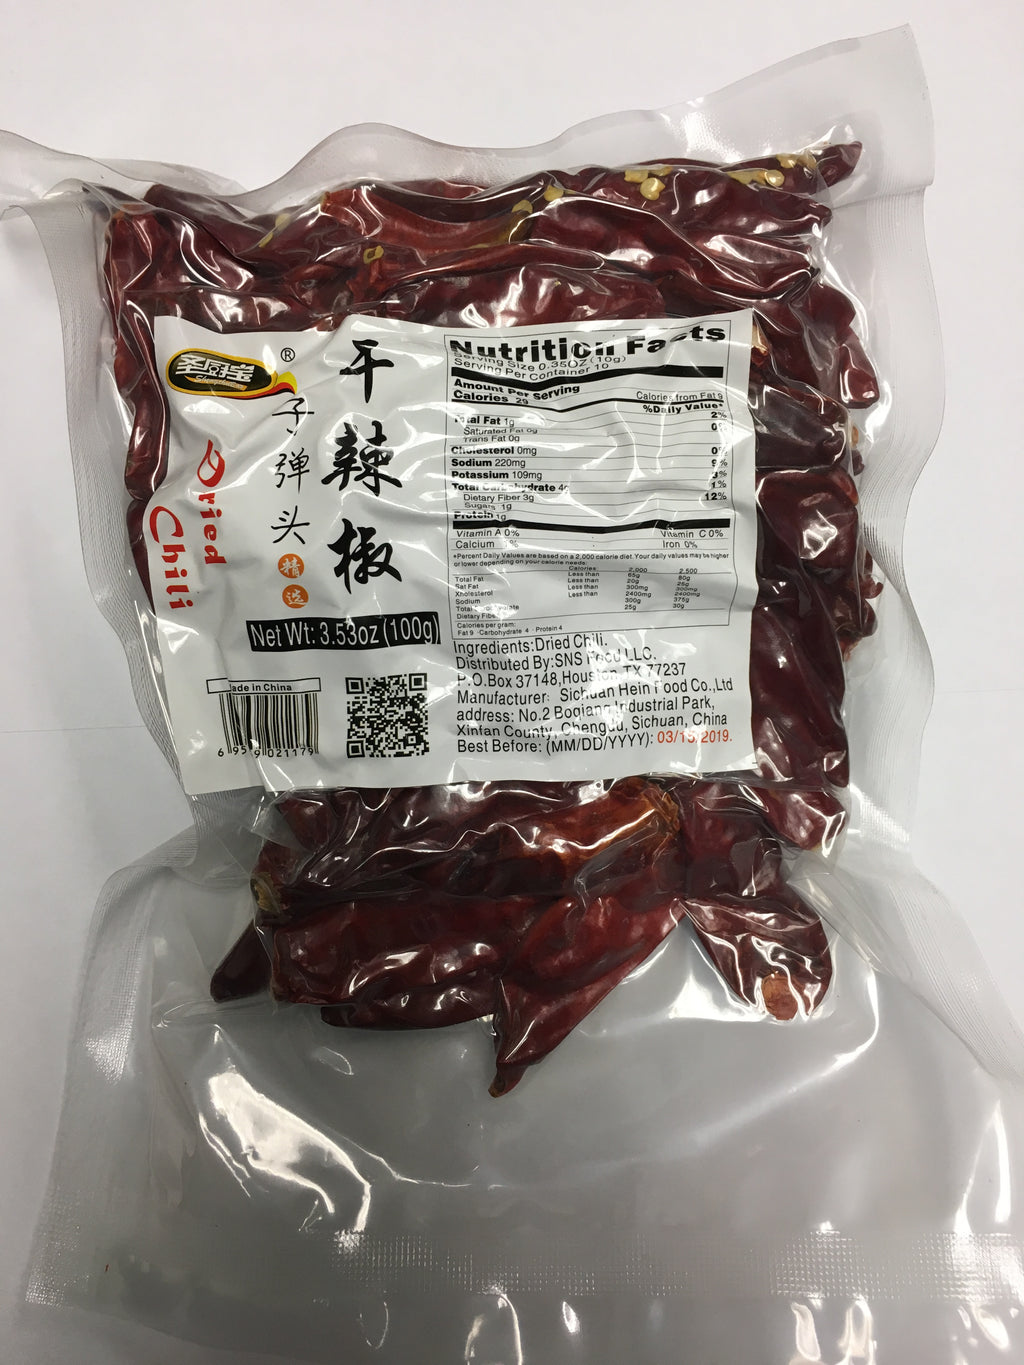 Spicy Element Sichuan Dried Chili Pepper - Zi Dan Tou, 3.53 oz for Sichuan Dishes and Hot Pot (100g)